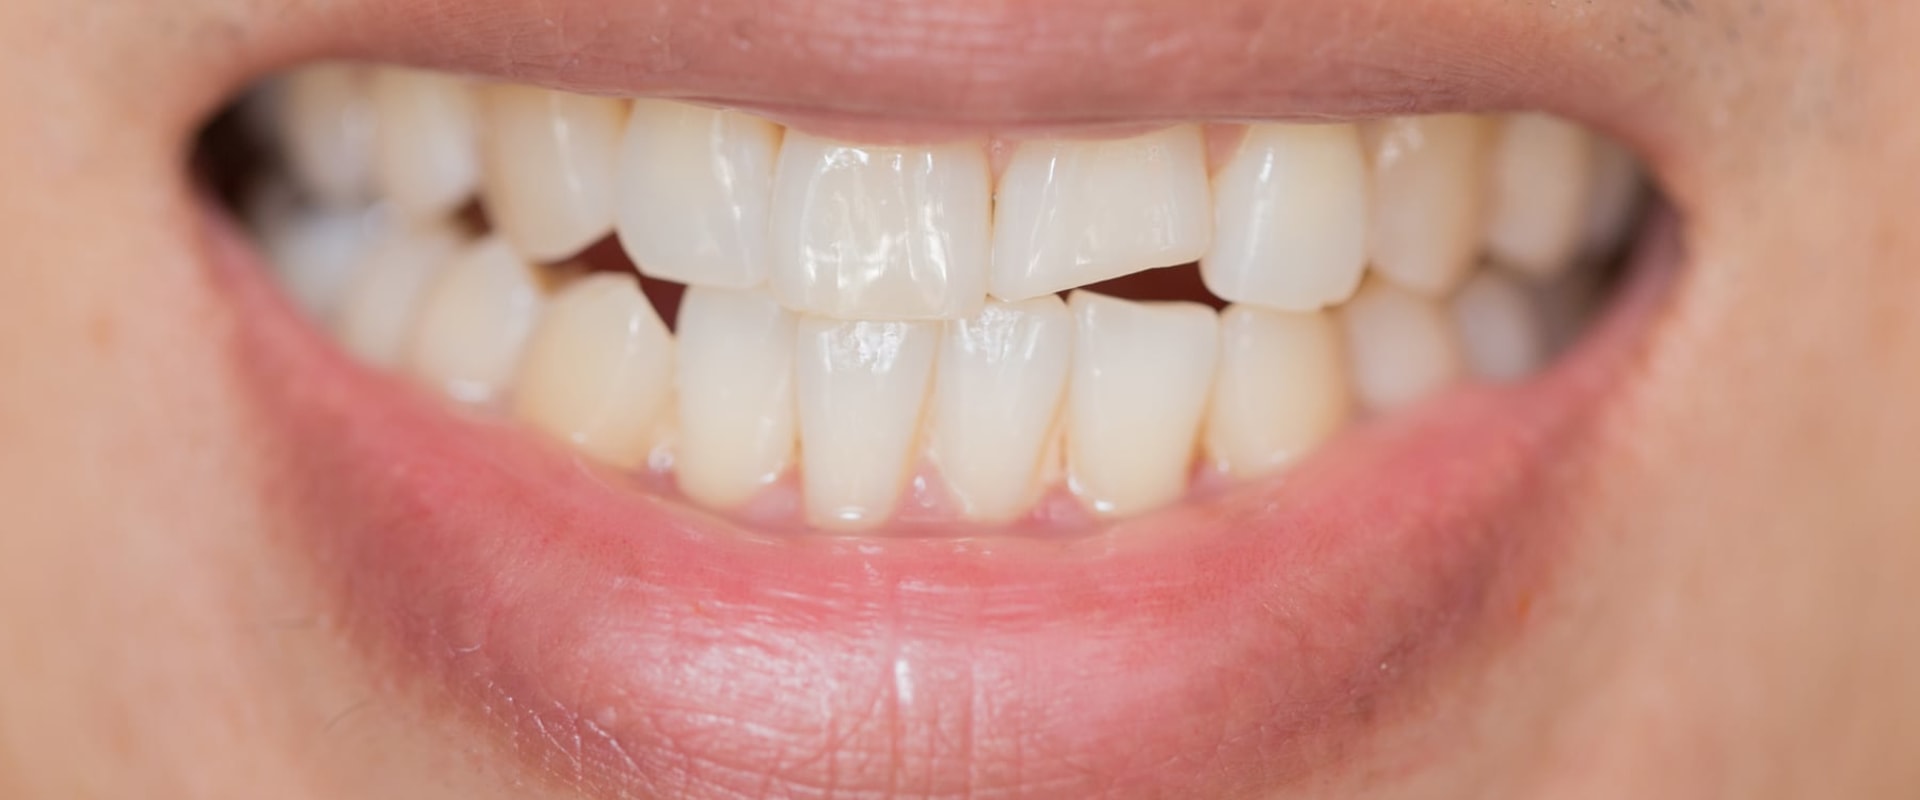 How Long Will a Chipped Tooth Last?